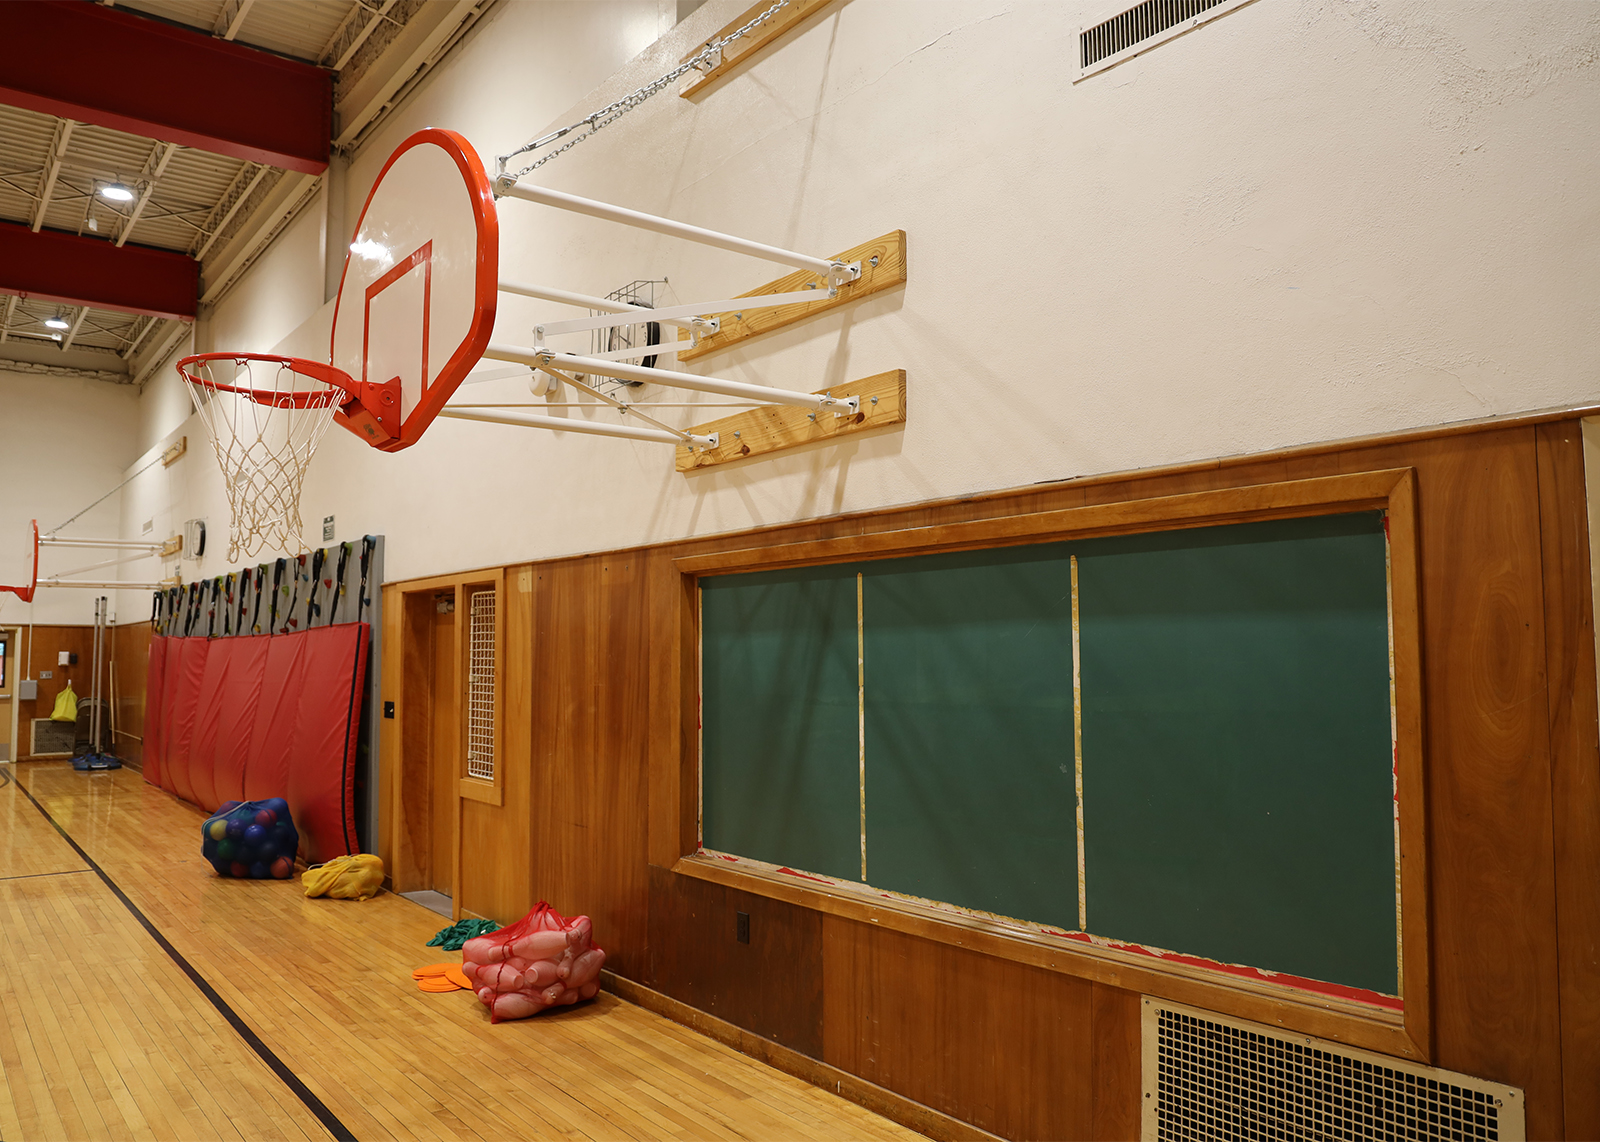 outdated gymnasium with basketball hoop and chlakboard